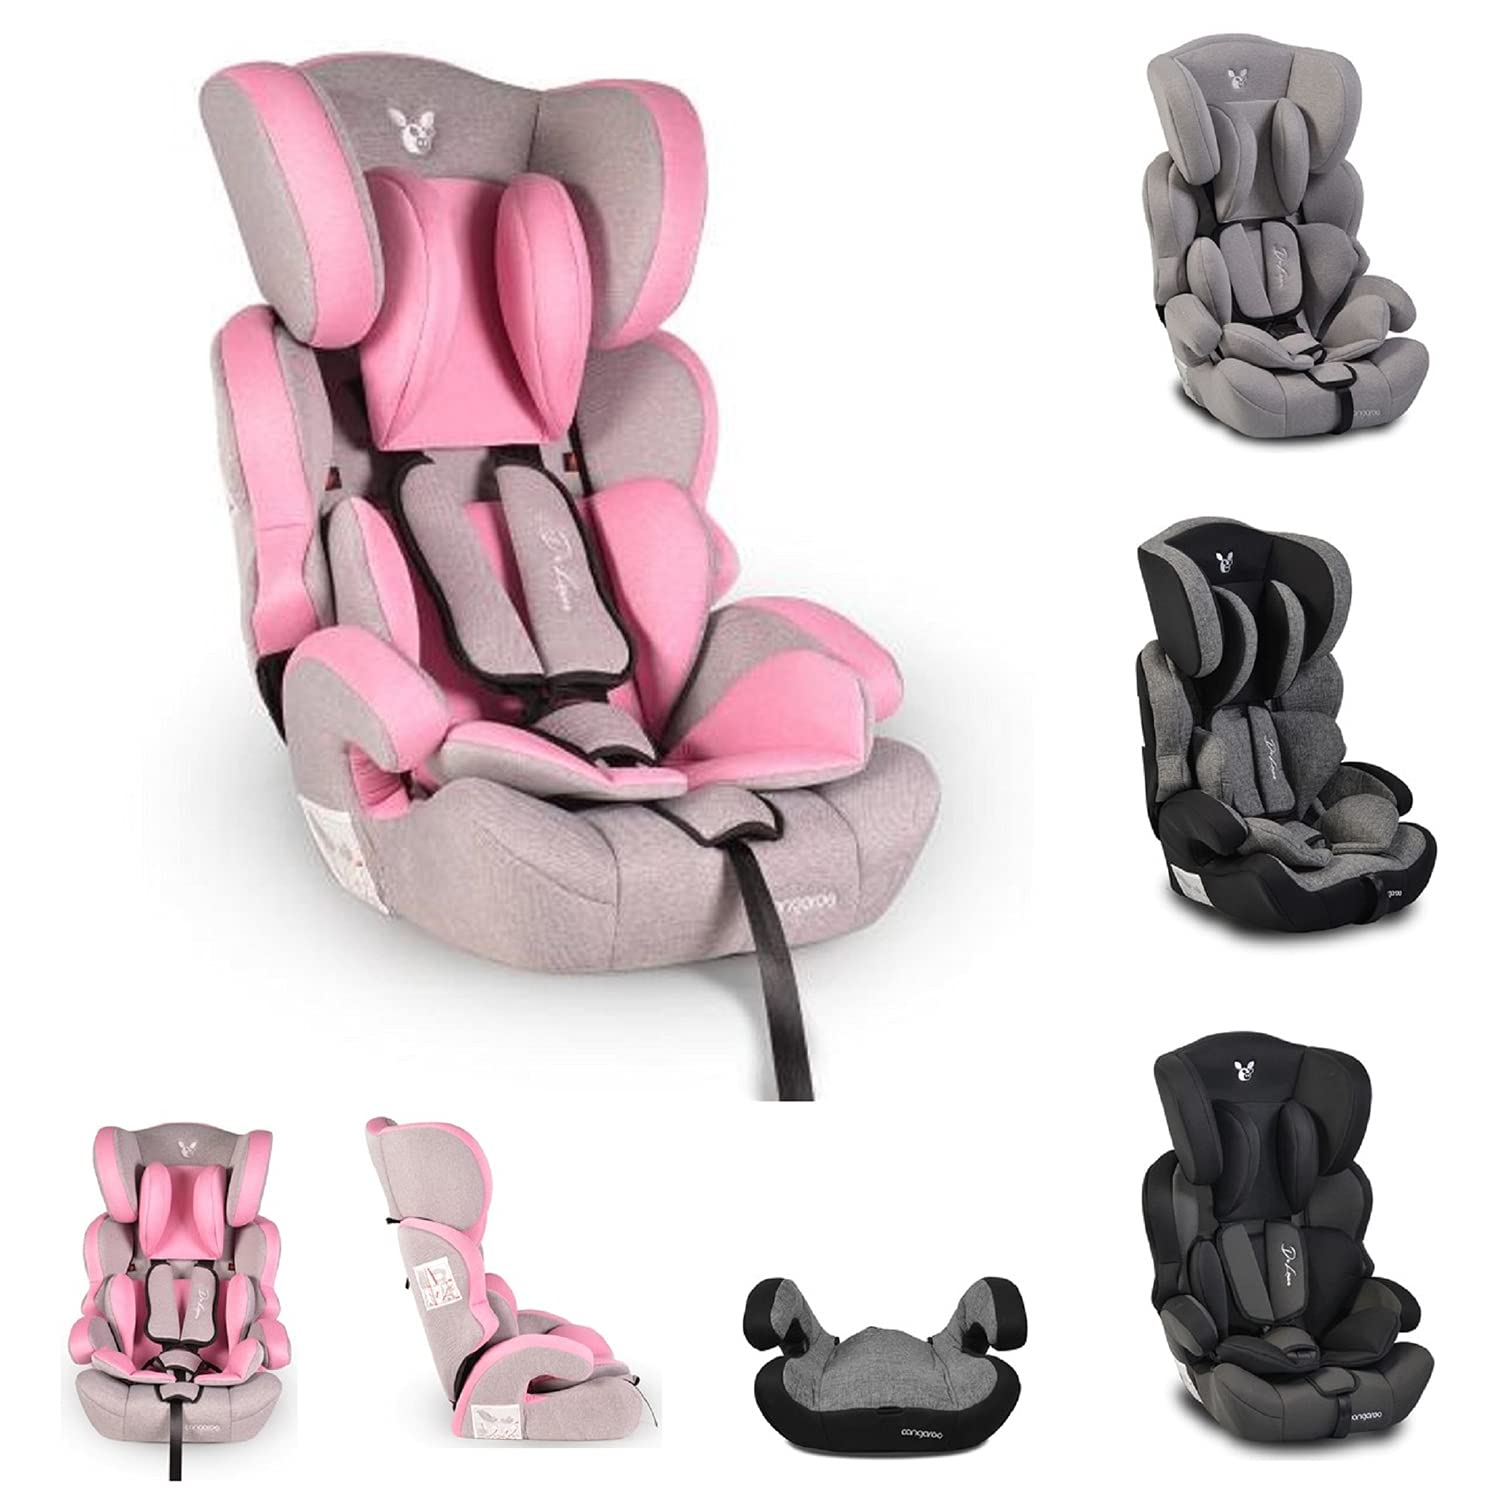 Cangaroo Deluxe Child Seat Group 1/2/3 (9-36 kg) Adjustable 1 to 12 Years Pink